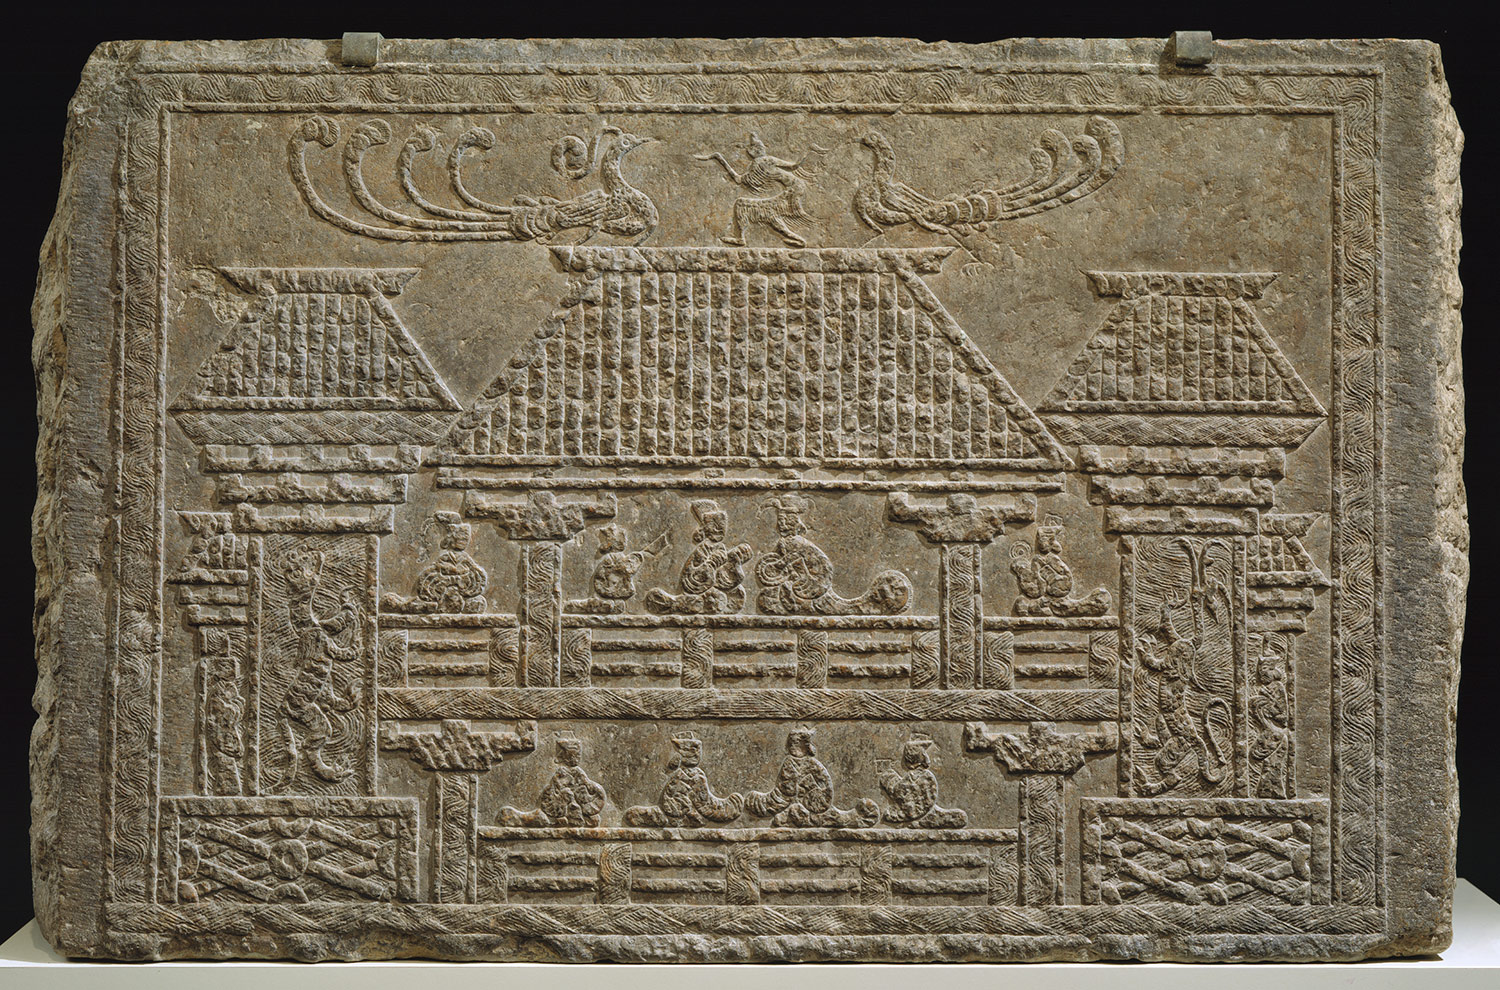 Tomb Relief from Han Dynasty, courtesy of Metropolitan Musuem of Art